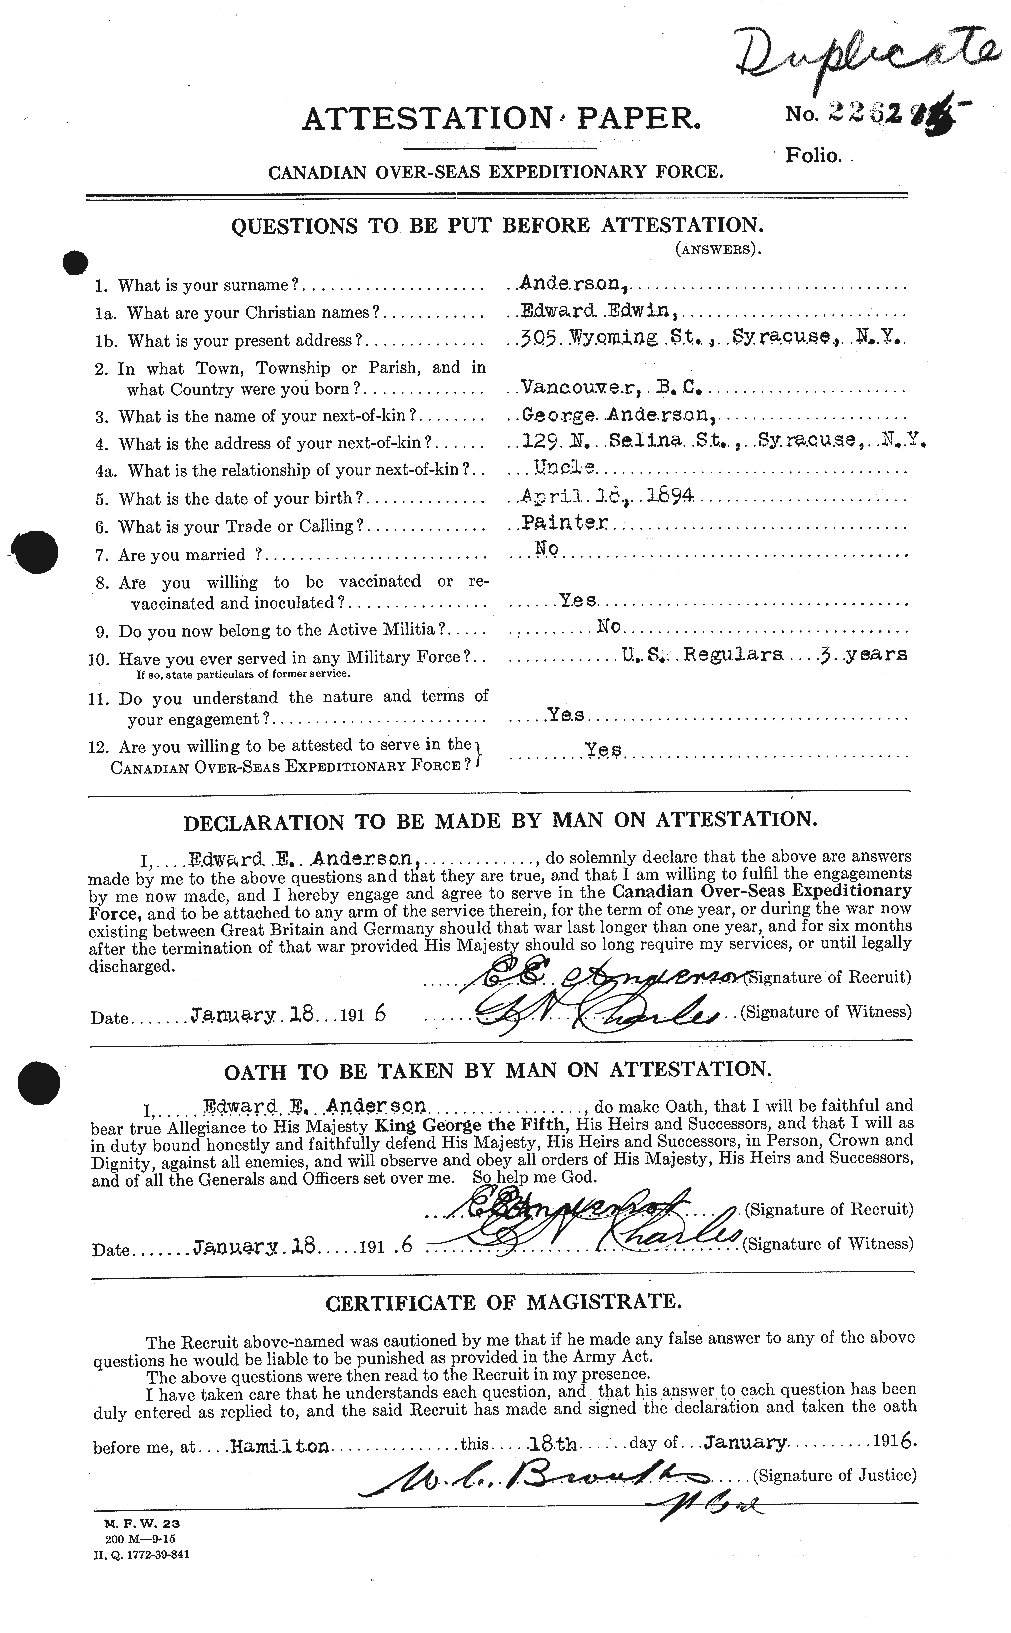 Personnel Records of the First World War - CEF 209937a